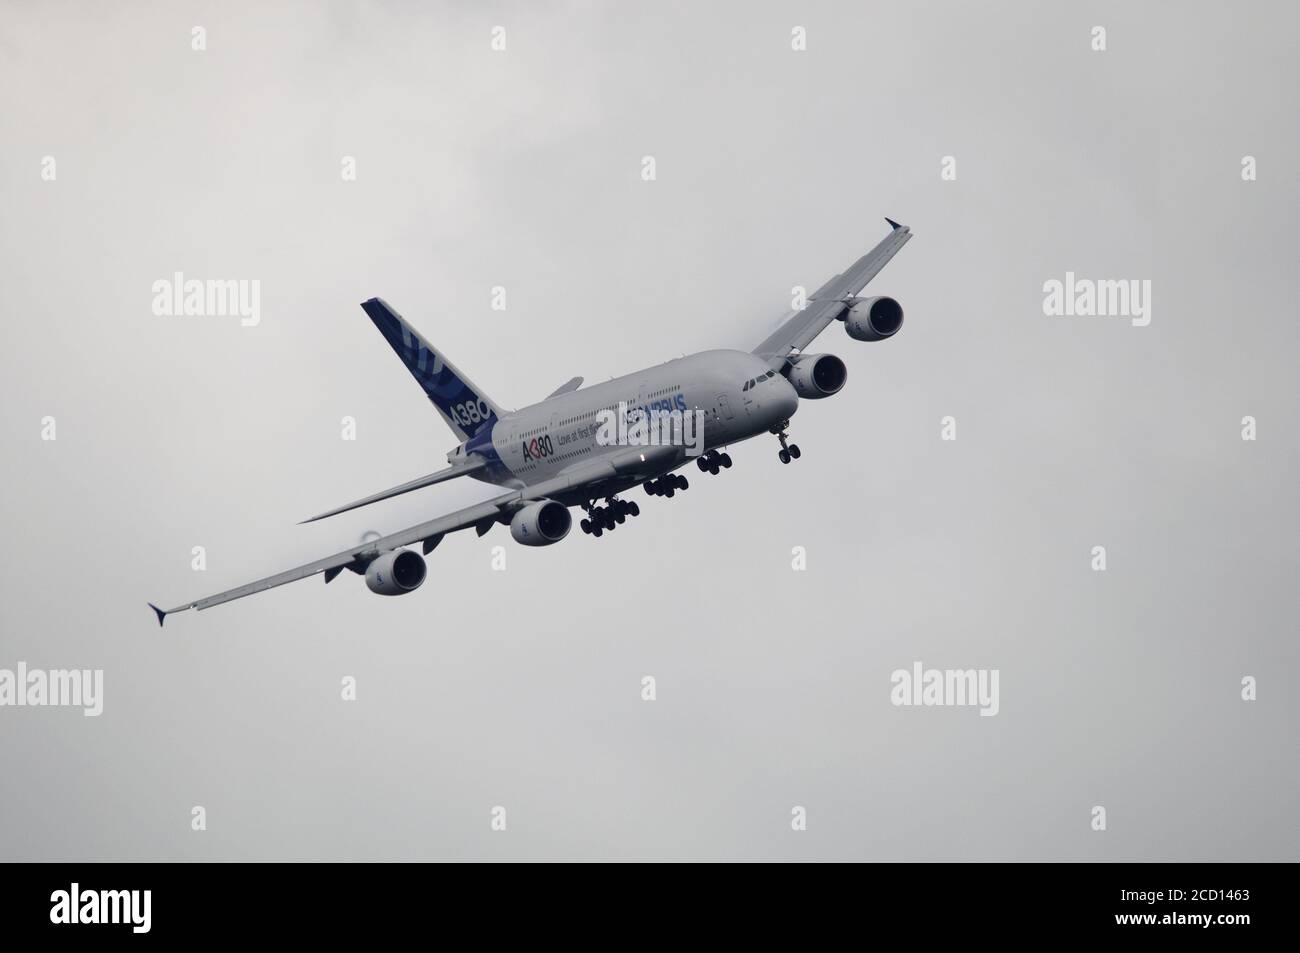 Airbus A380 approaching airport for landing Stock Photo